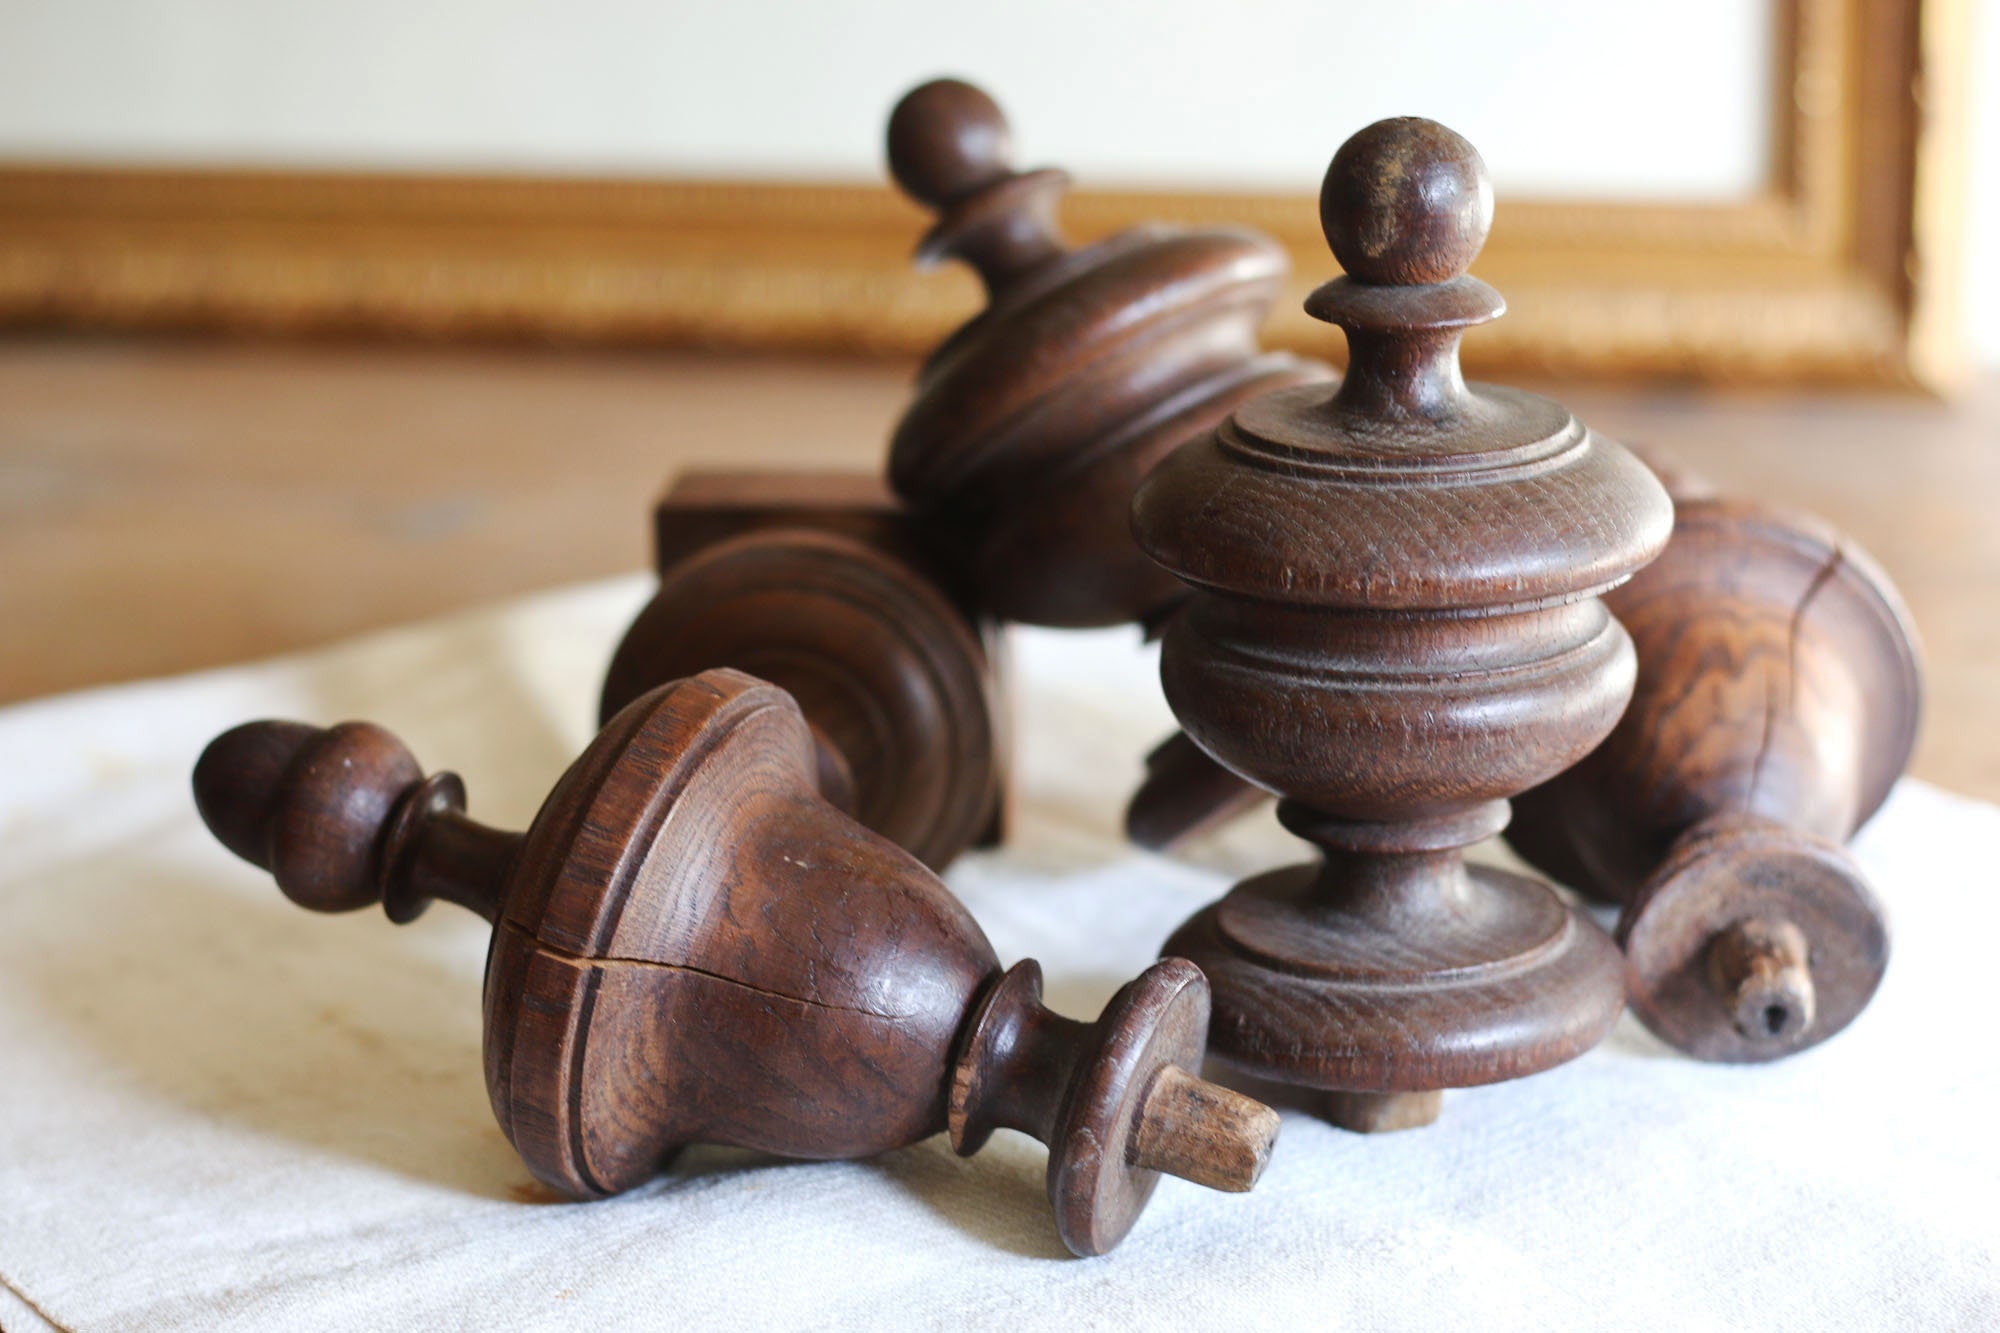 Vintage Carved Wood Finials Toppers for Furniture Curtain Rods.  Architectural Decor Stairwell or Drapery Hardware Repurpose- Set of 2